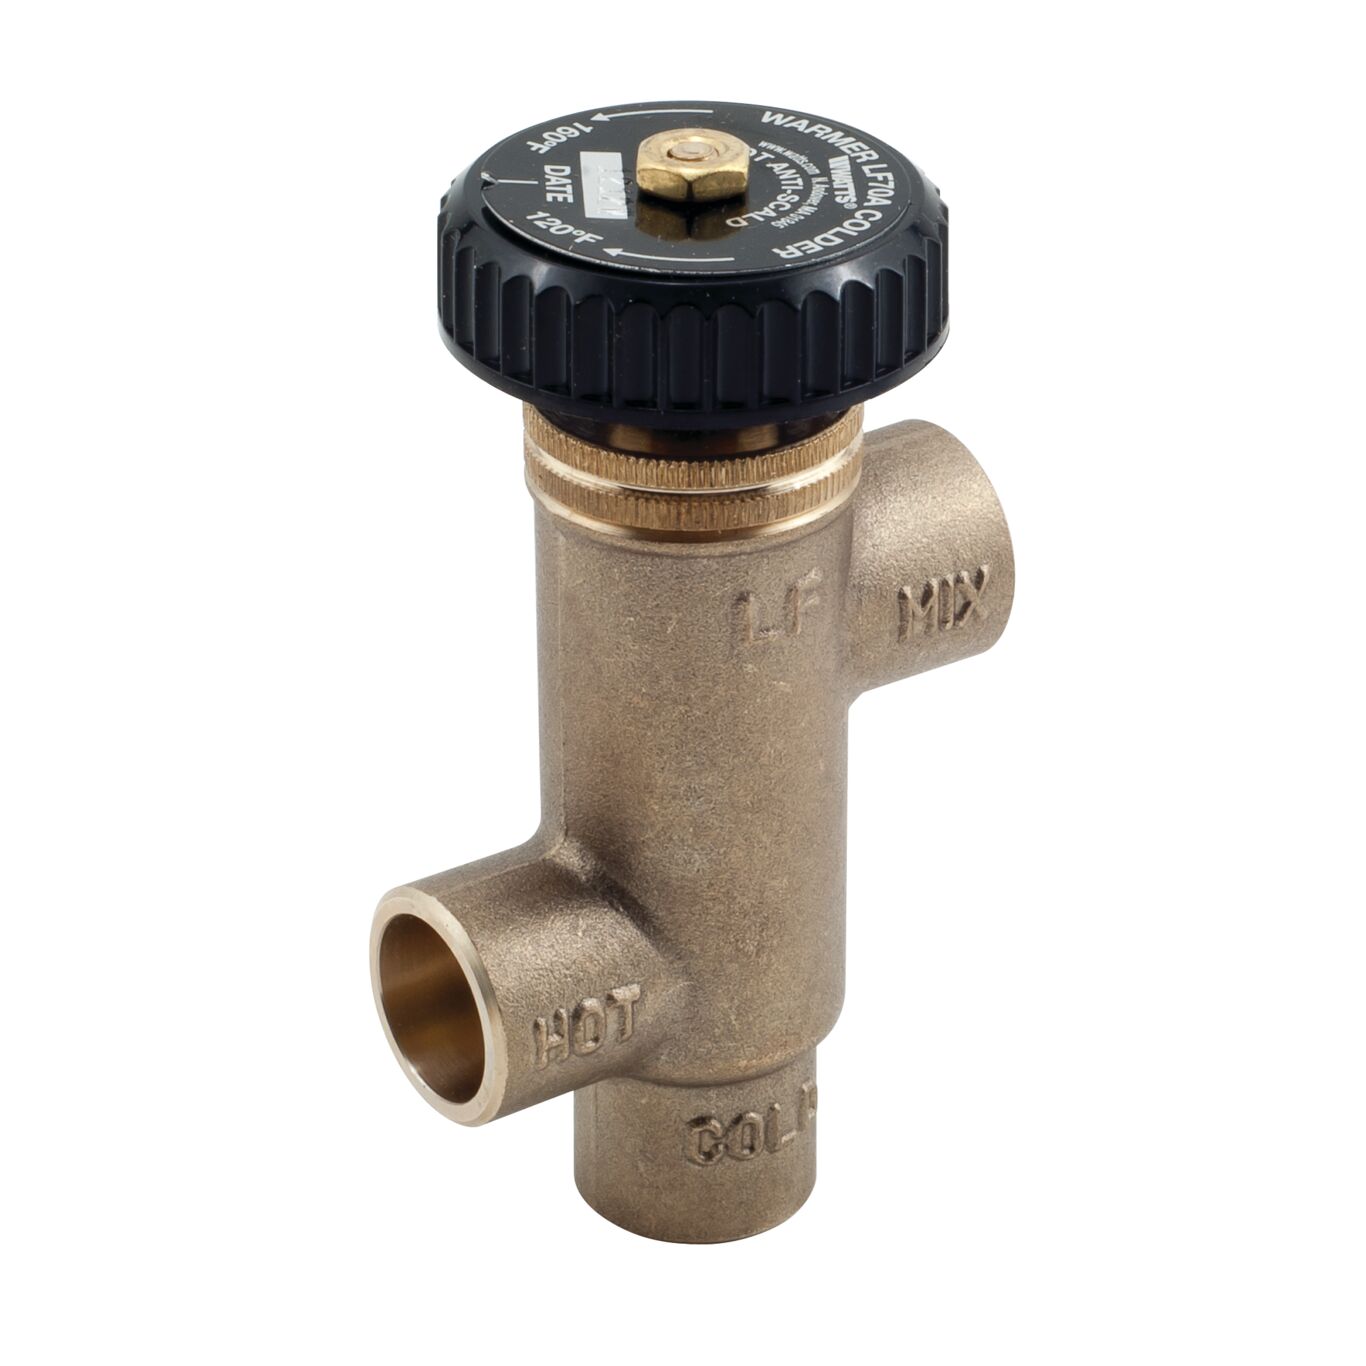 Watts 3/4 Lf70a Mixing Valve Lead Brass 150 PSI for sale online 